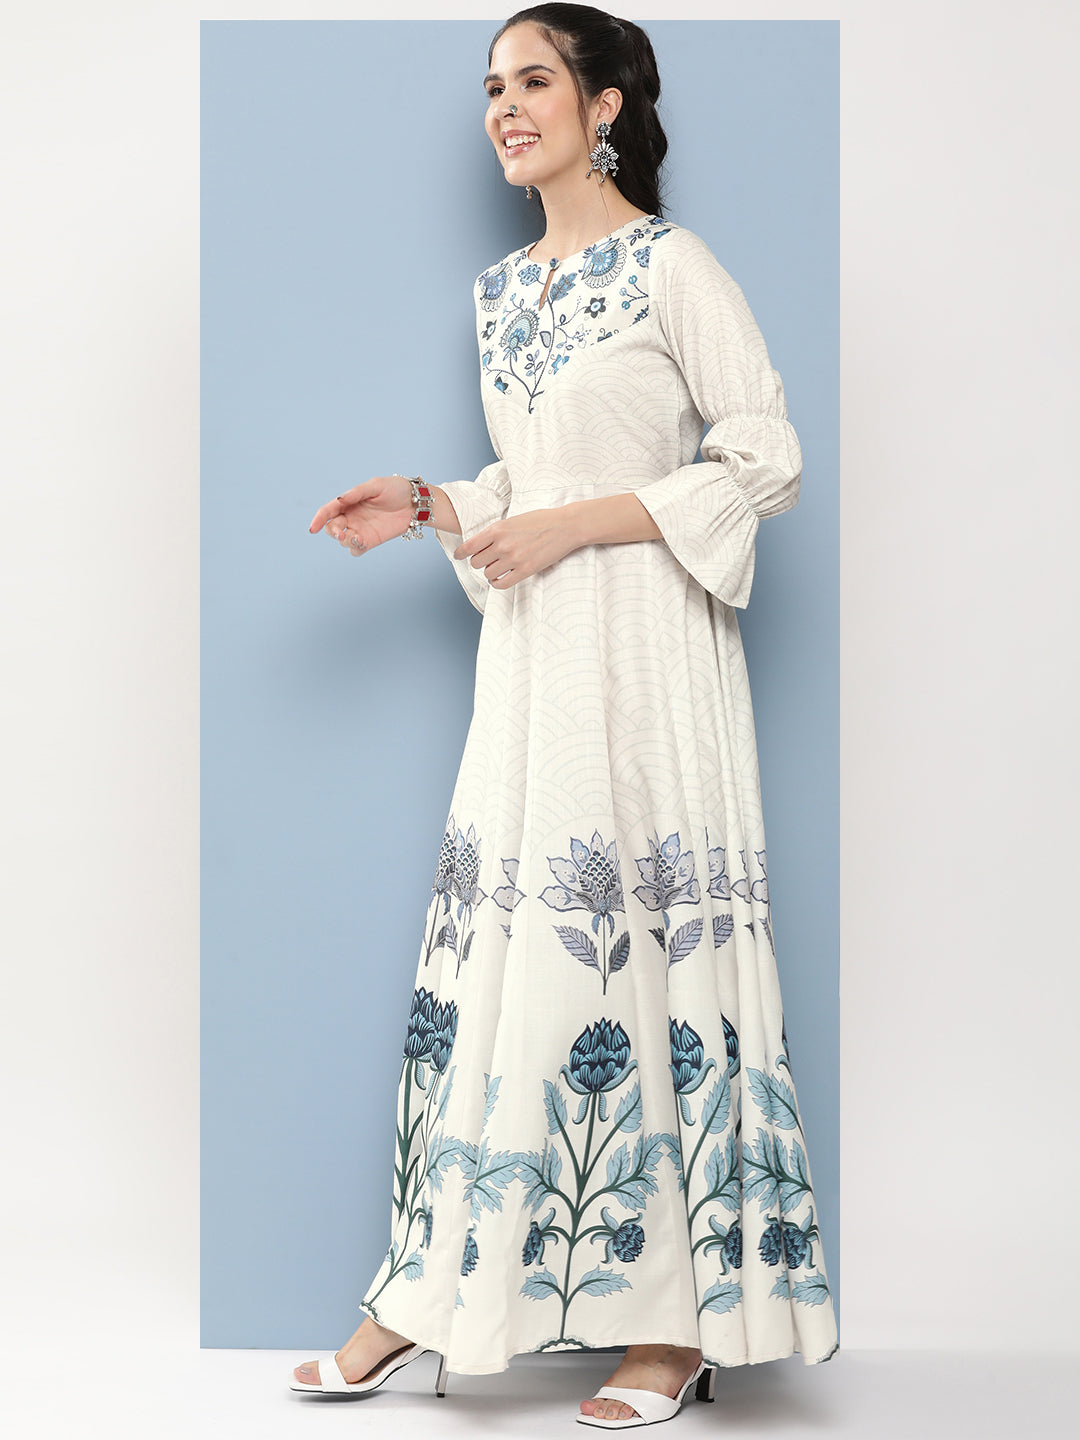 Women's Off-White & Blue Printed Long Dress With Waist Belt - Bhama Couture